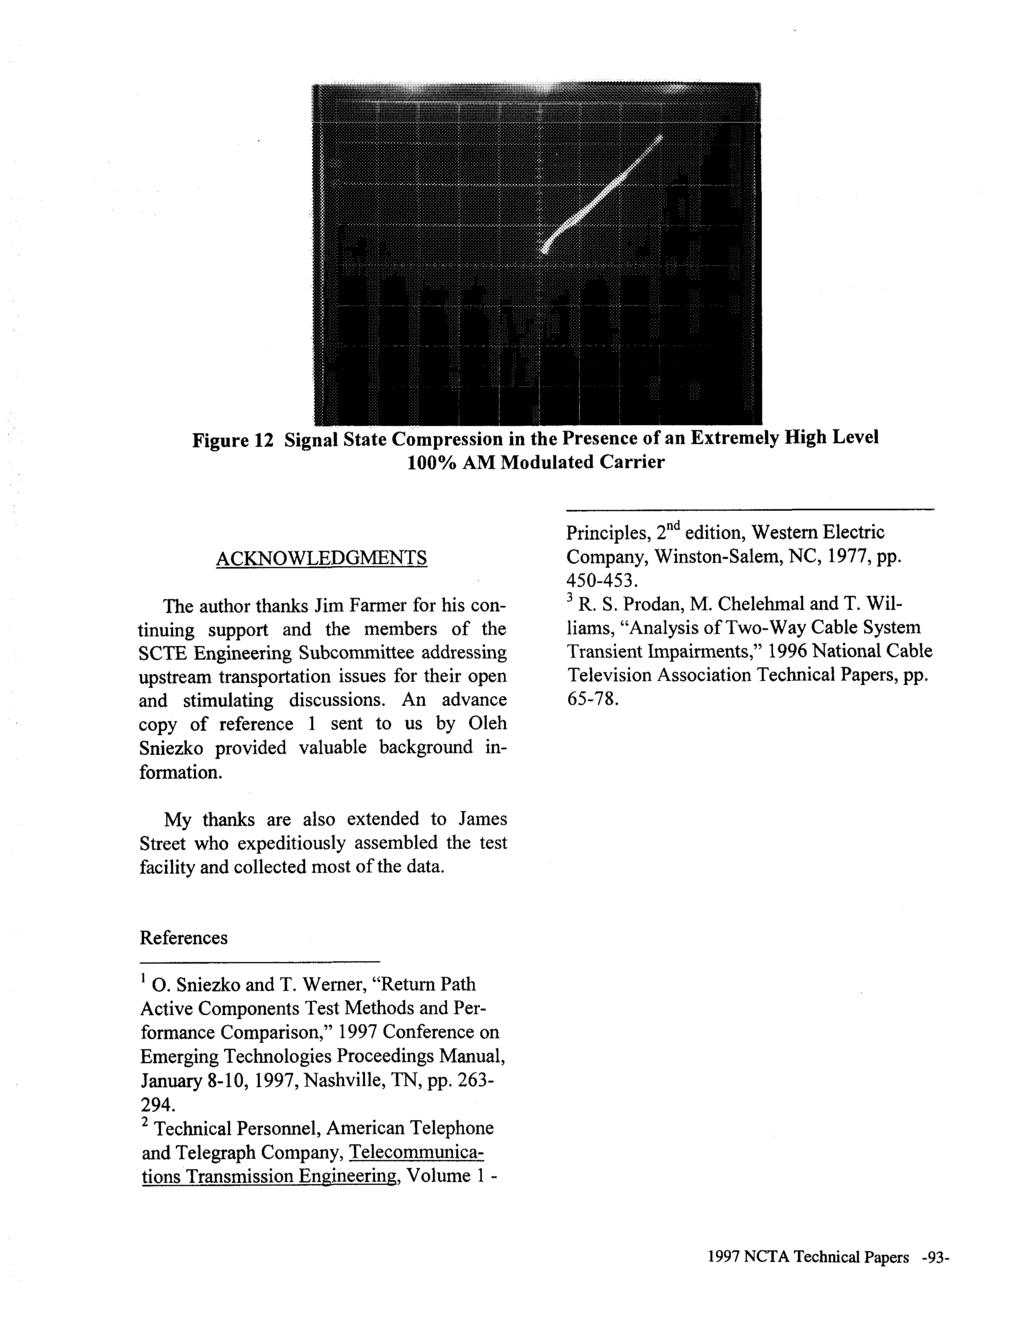 Figure 12 Signal State Compression in the Presence of an Extremely High Level 100% AM Modulated Carrier ACKNOWLEDGMENTS The author thanks Jim Farmer for his continuing support and the members of the